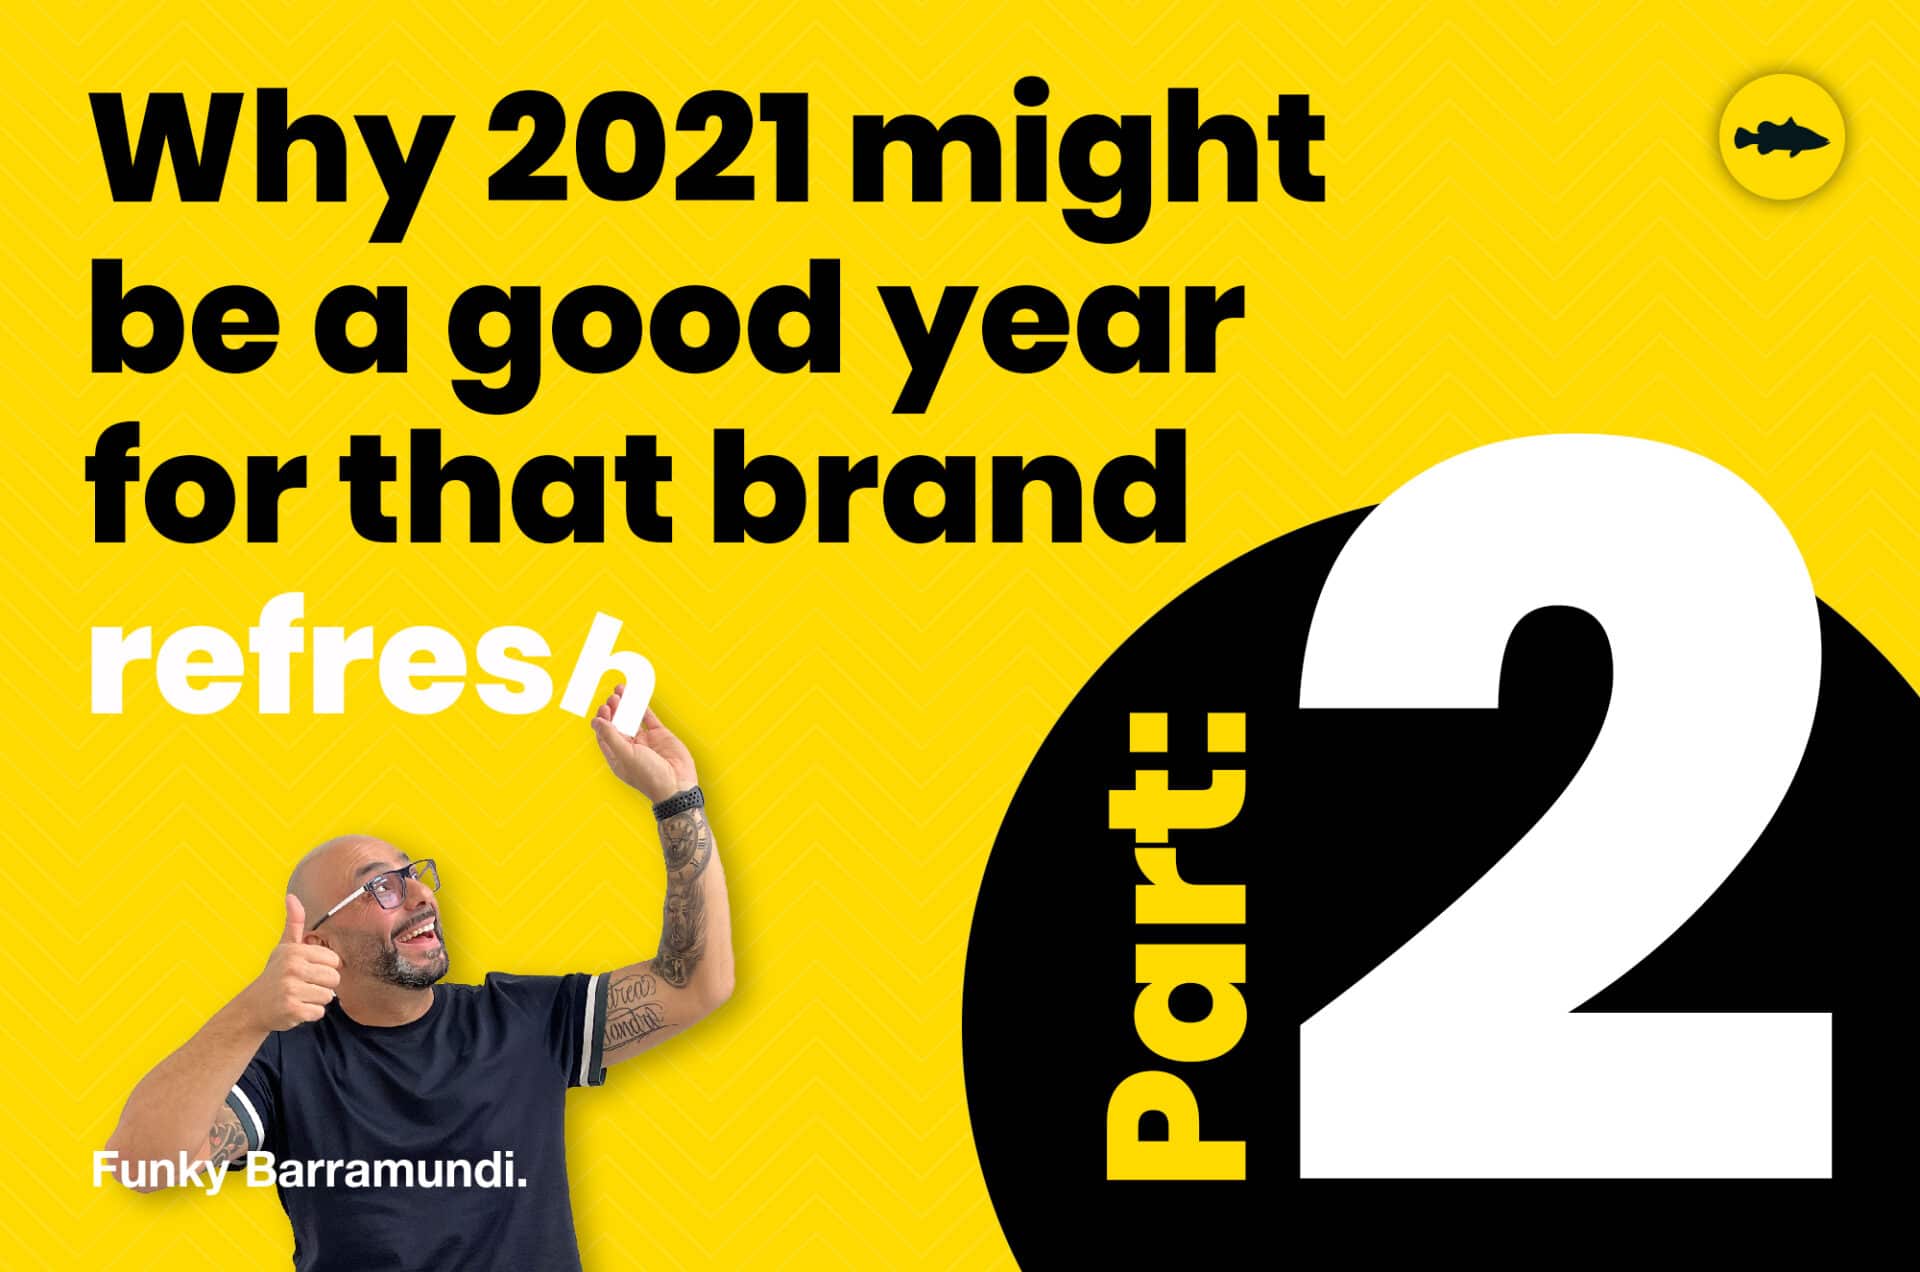 Part 2: Why 2021 might be a good year for that brand refresh